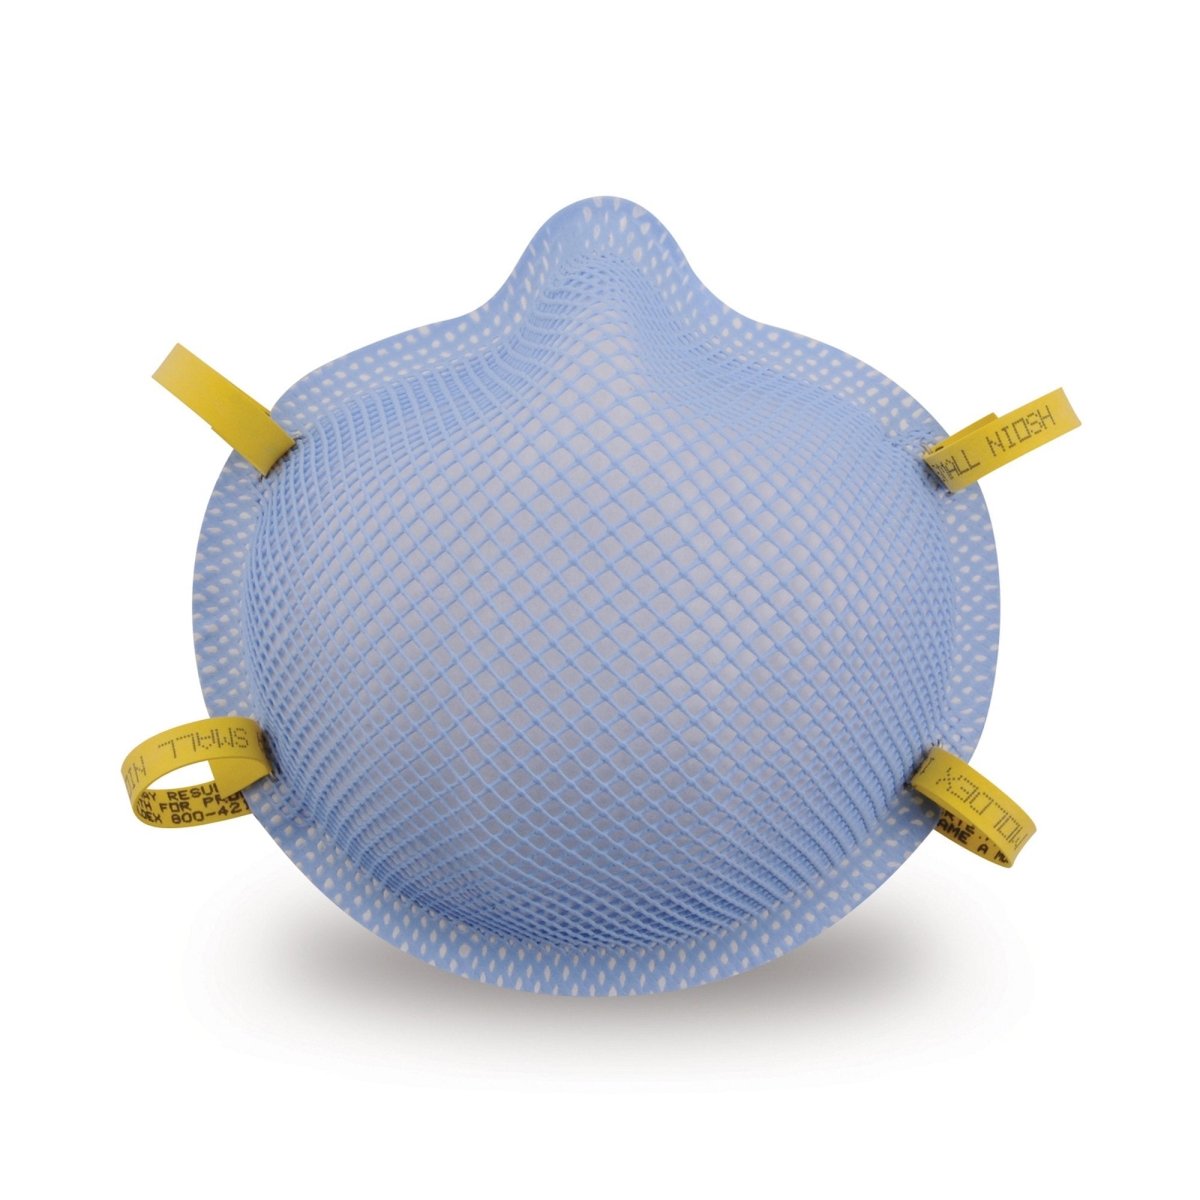 Moldex Particulate Respirator / Surgical Mask